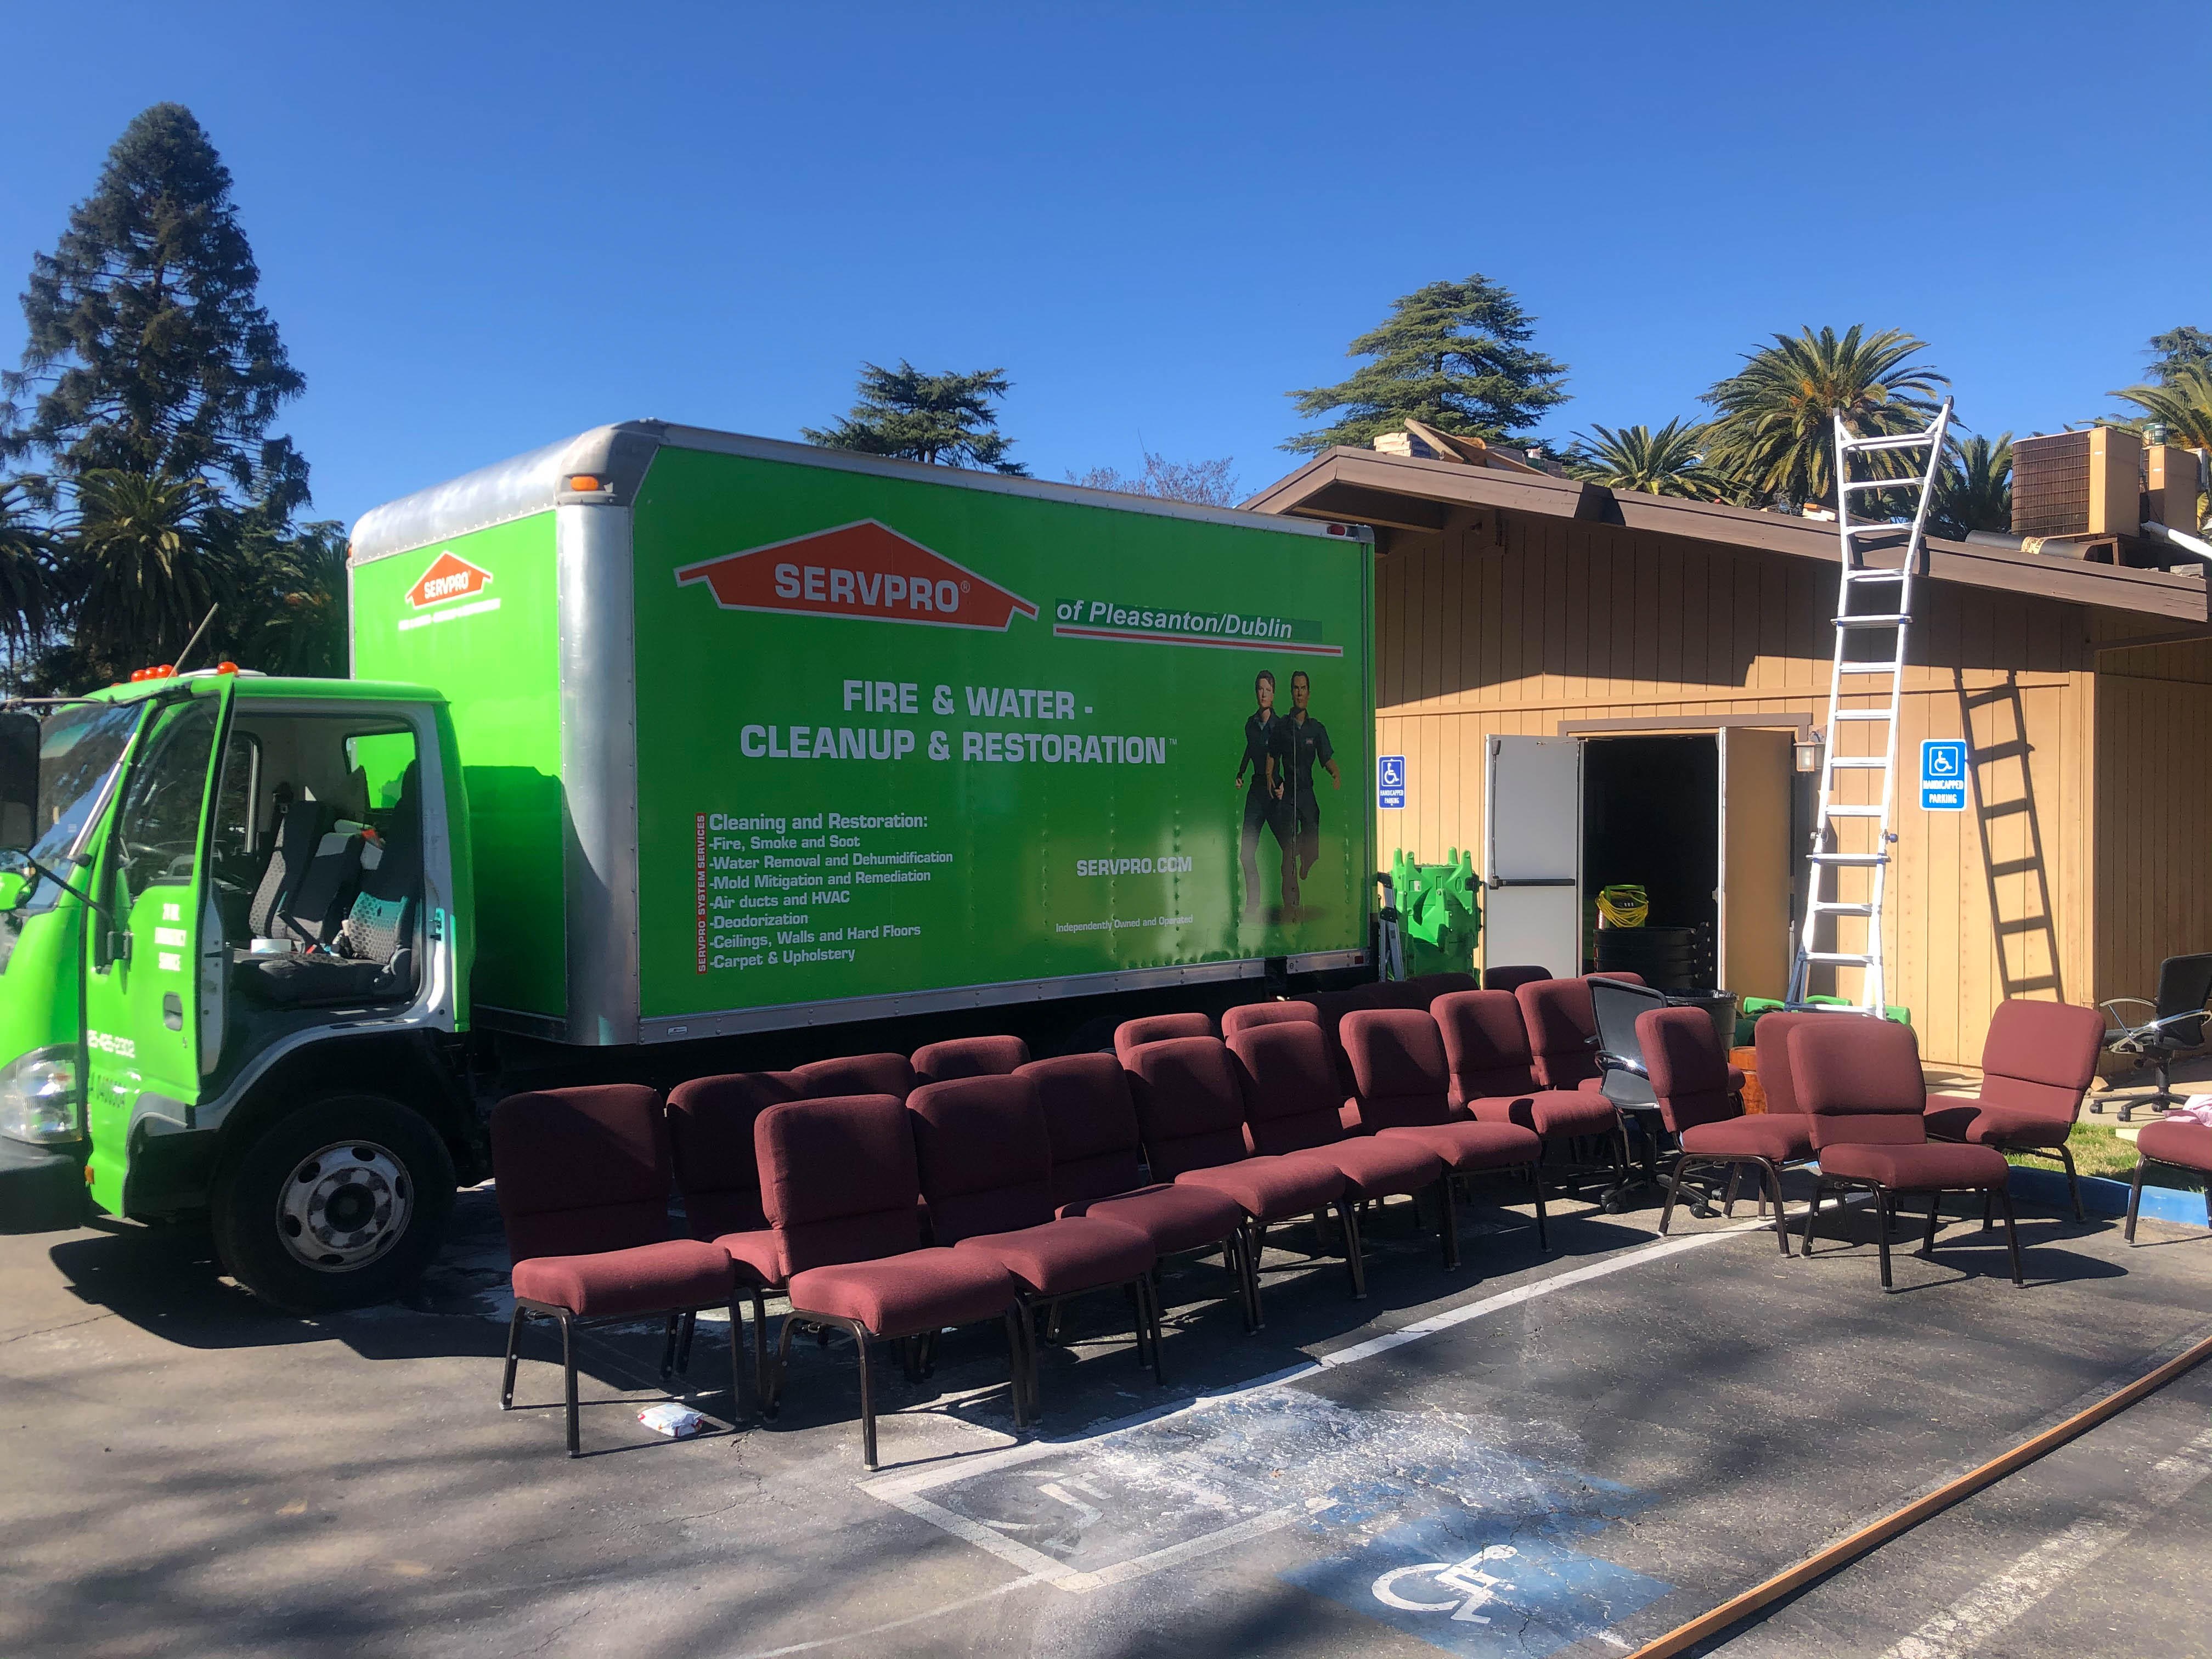 Call us today for assistance from SERVPRO of Pleasanton/Dublin, your go-to company for water restoration emergencies around the clock in Dublin, CA.